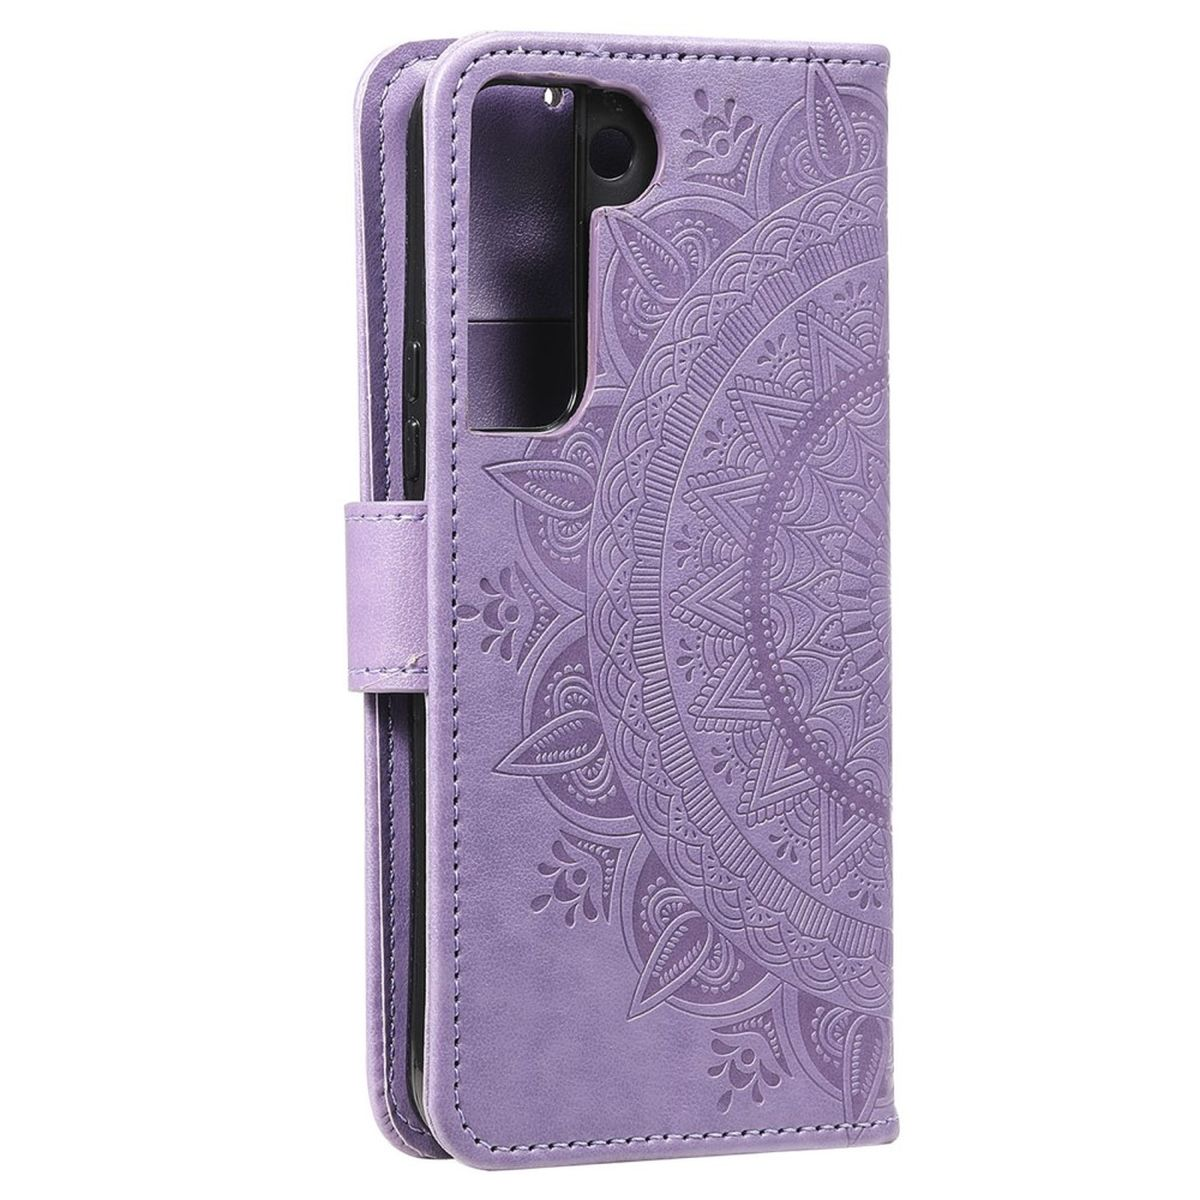 COVERKINGZ Klapphülle mit Mandala Galaxy Muster, S22 Bookcover, 5G, Lila Samsung